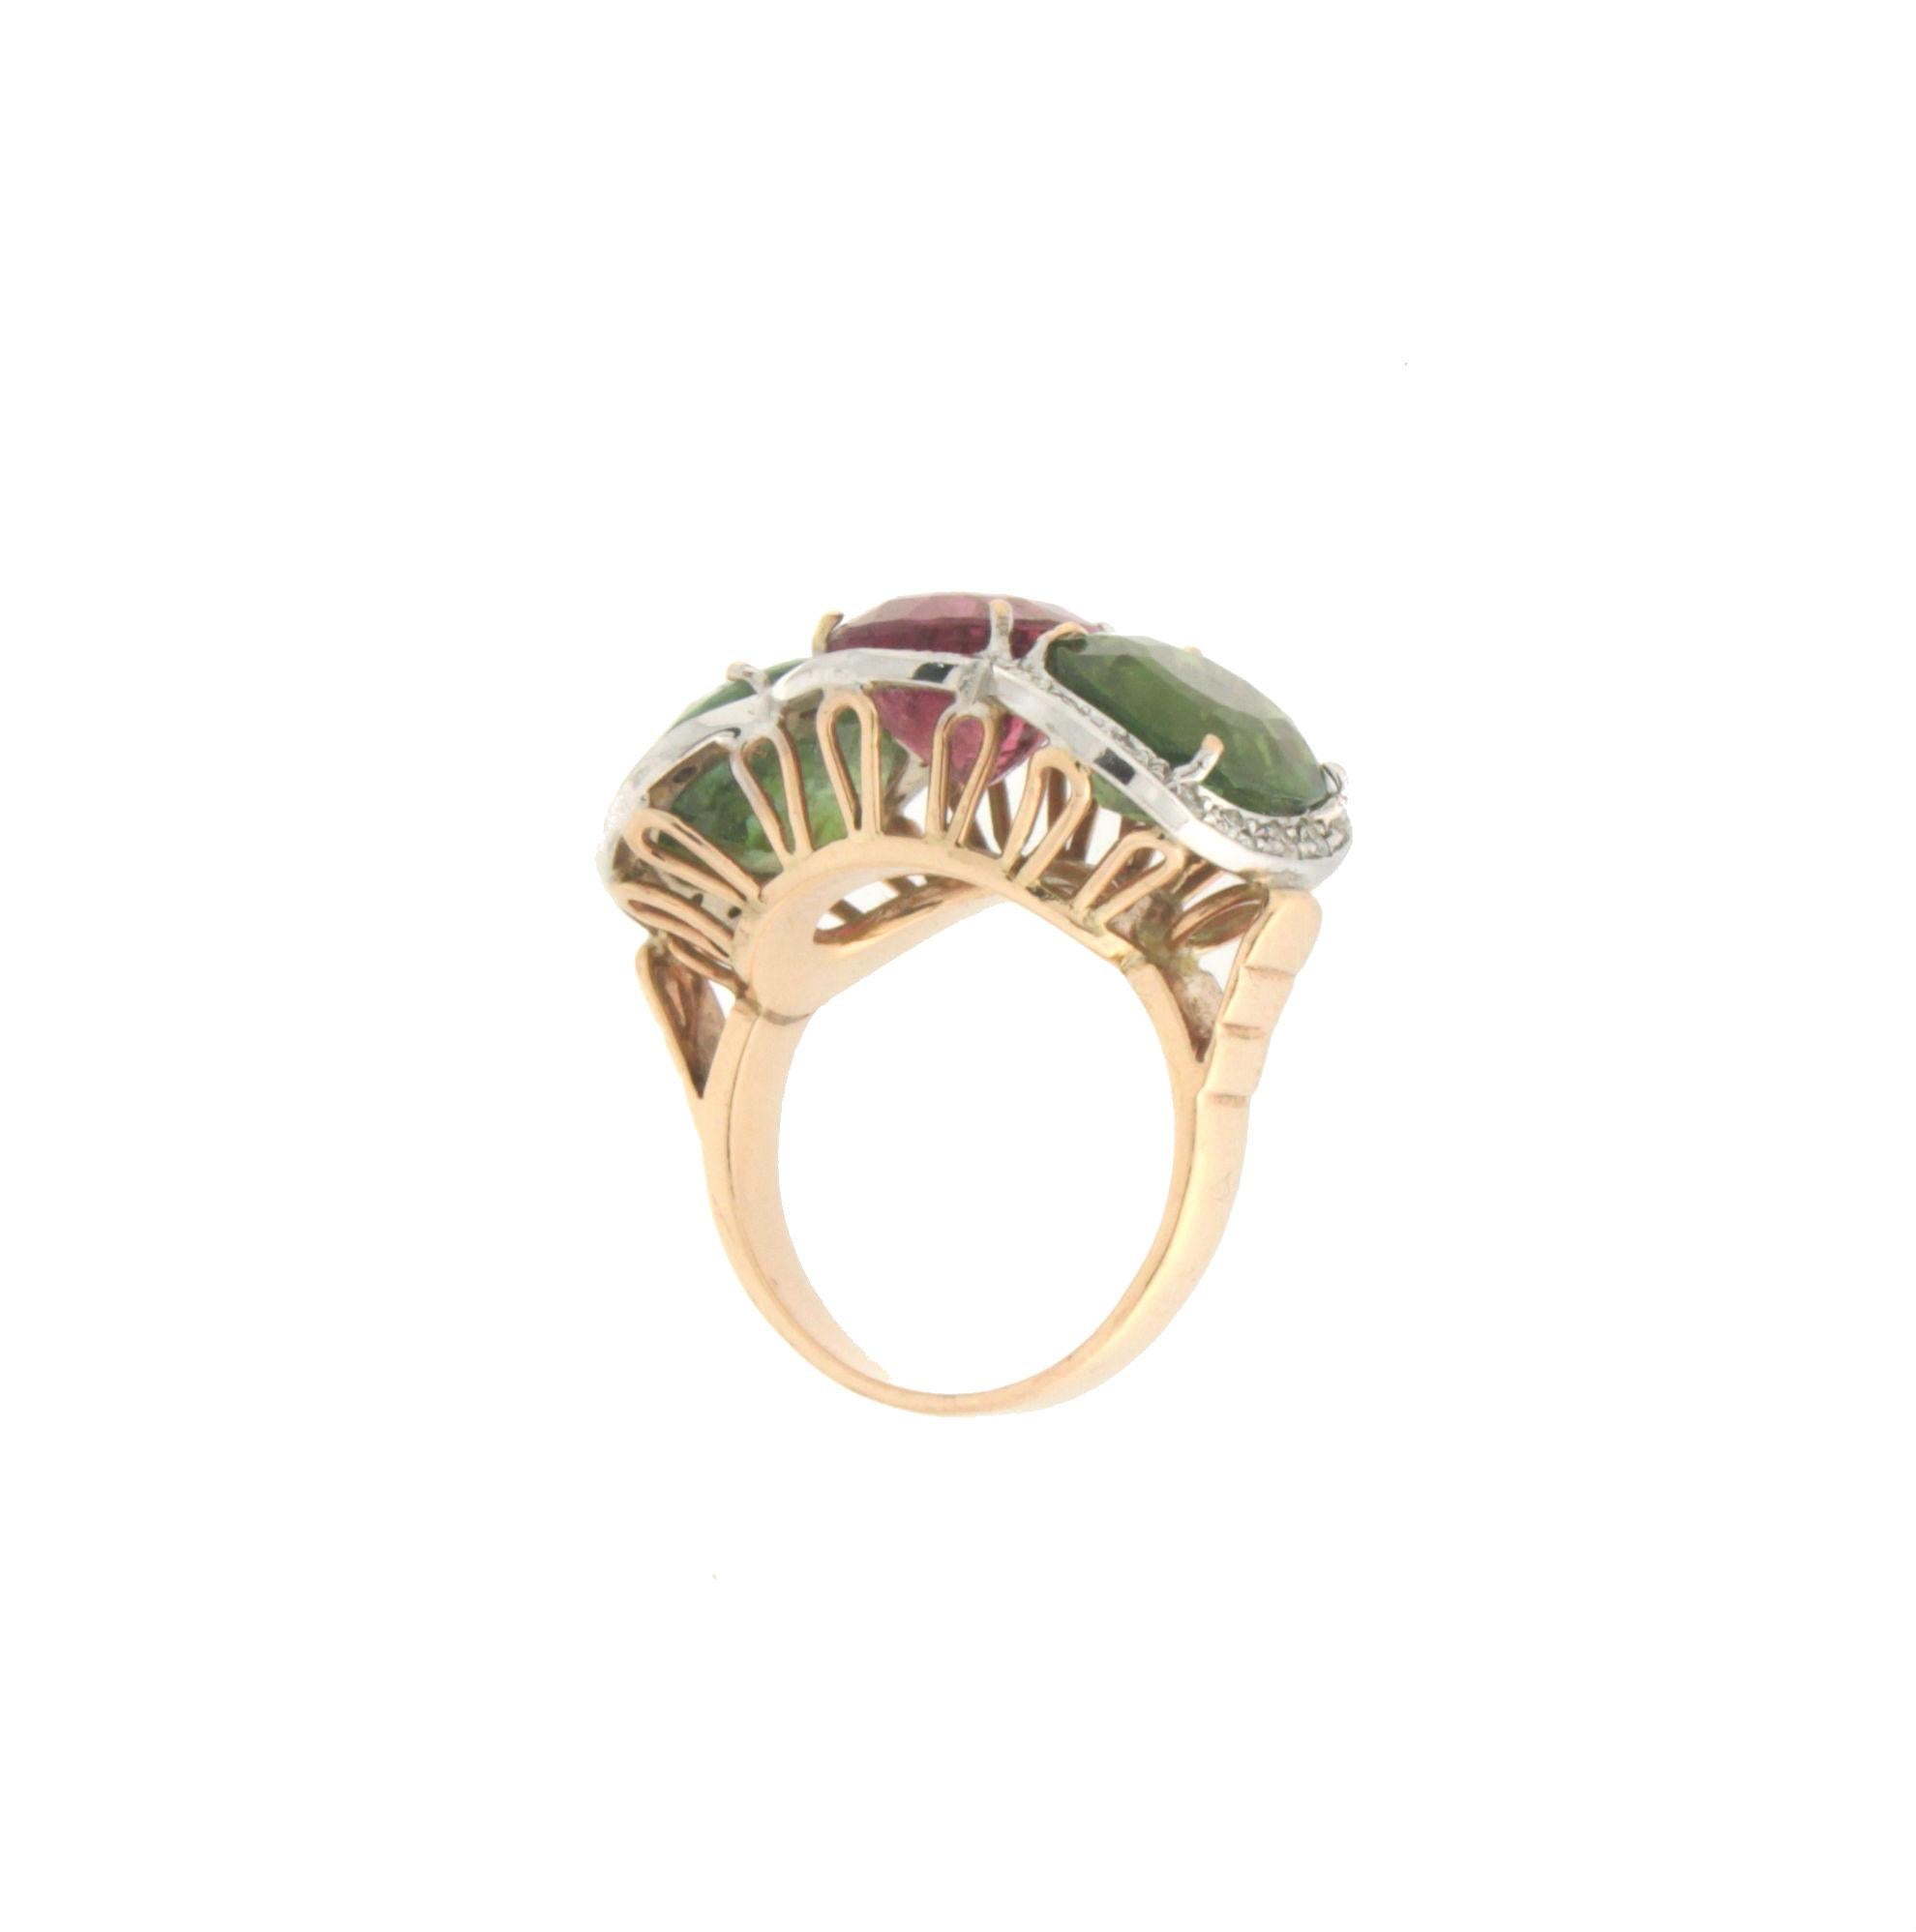 Brilliant Cut Handcraft Tourmaline 14 Karat Yellow and White Gold Diamonds Cocktail Ring For Sale